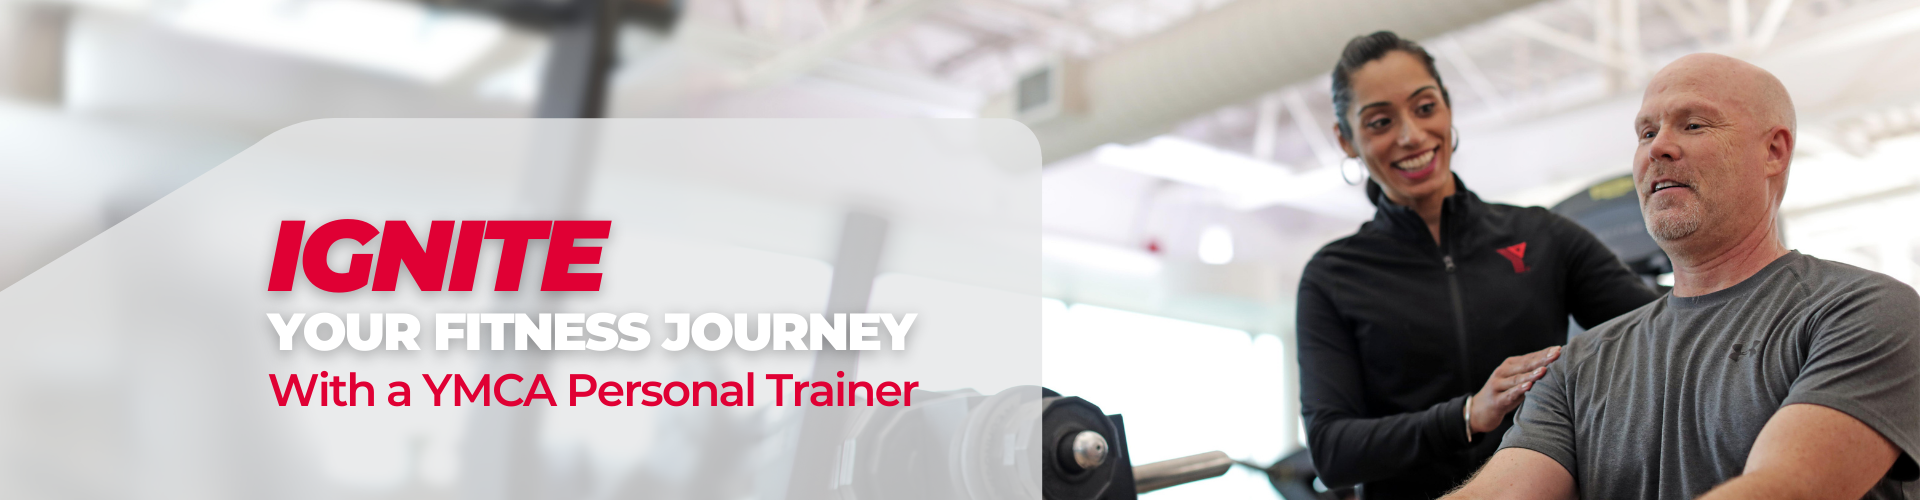 How to Become a Personal Trainer in Ontario Canada